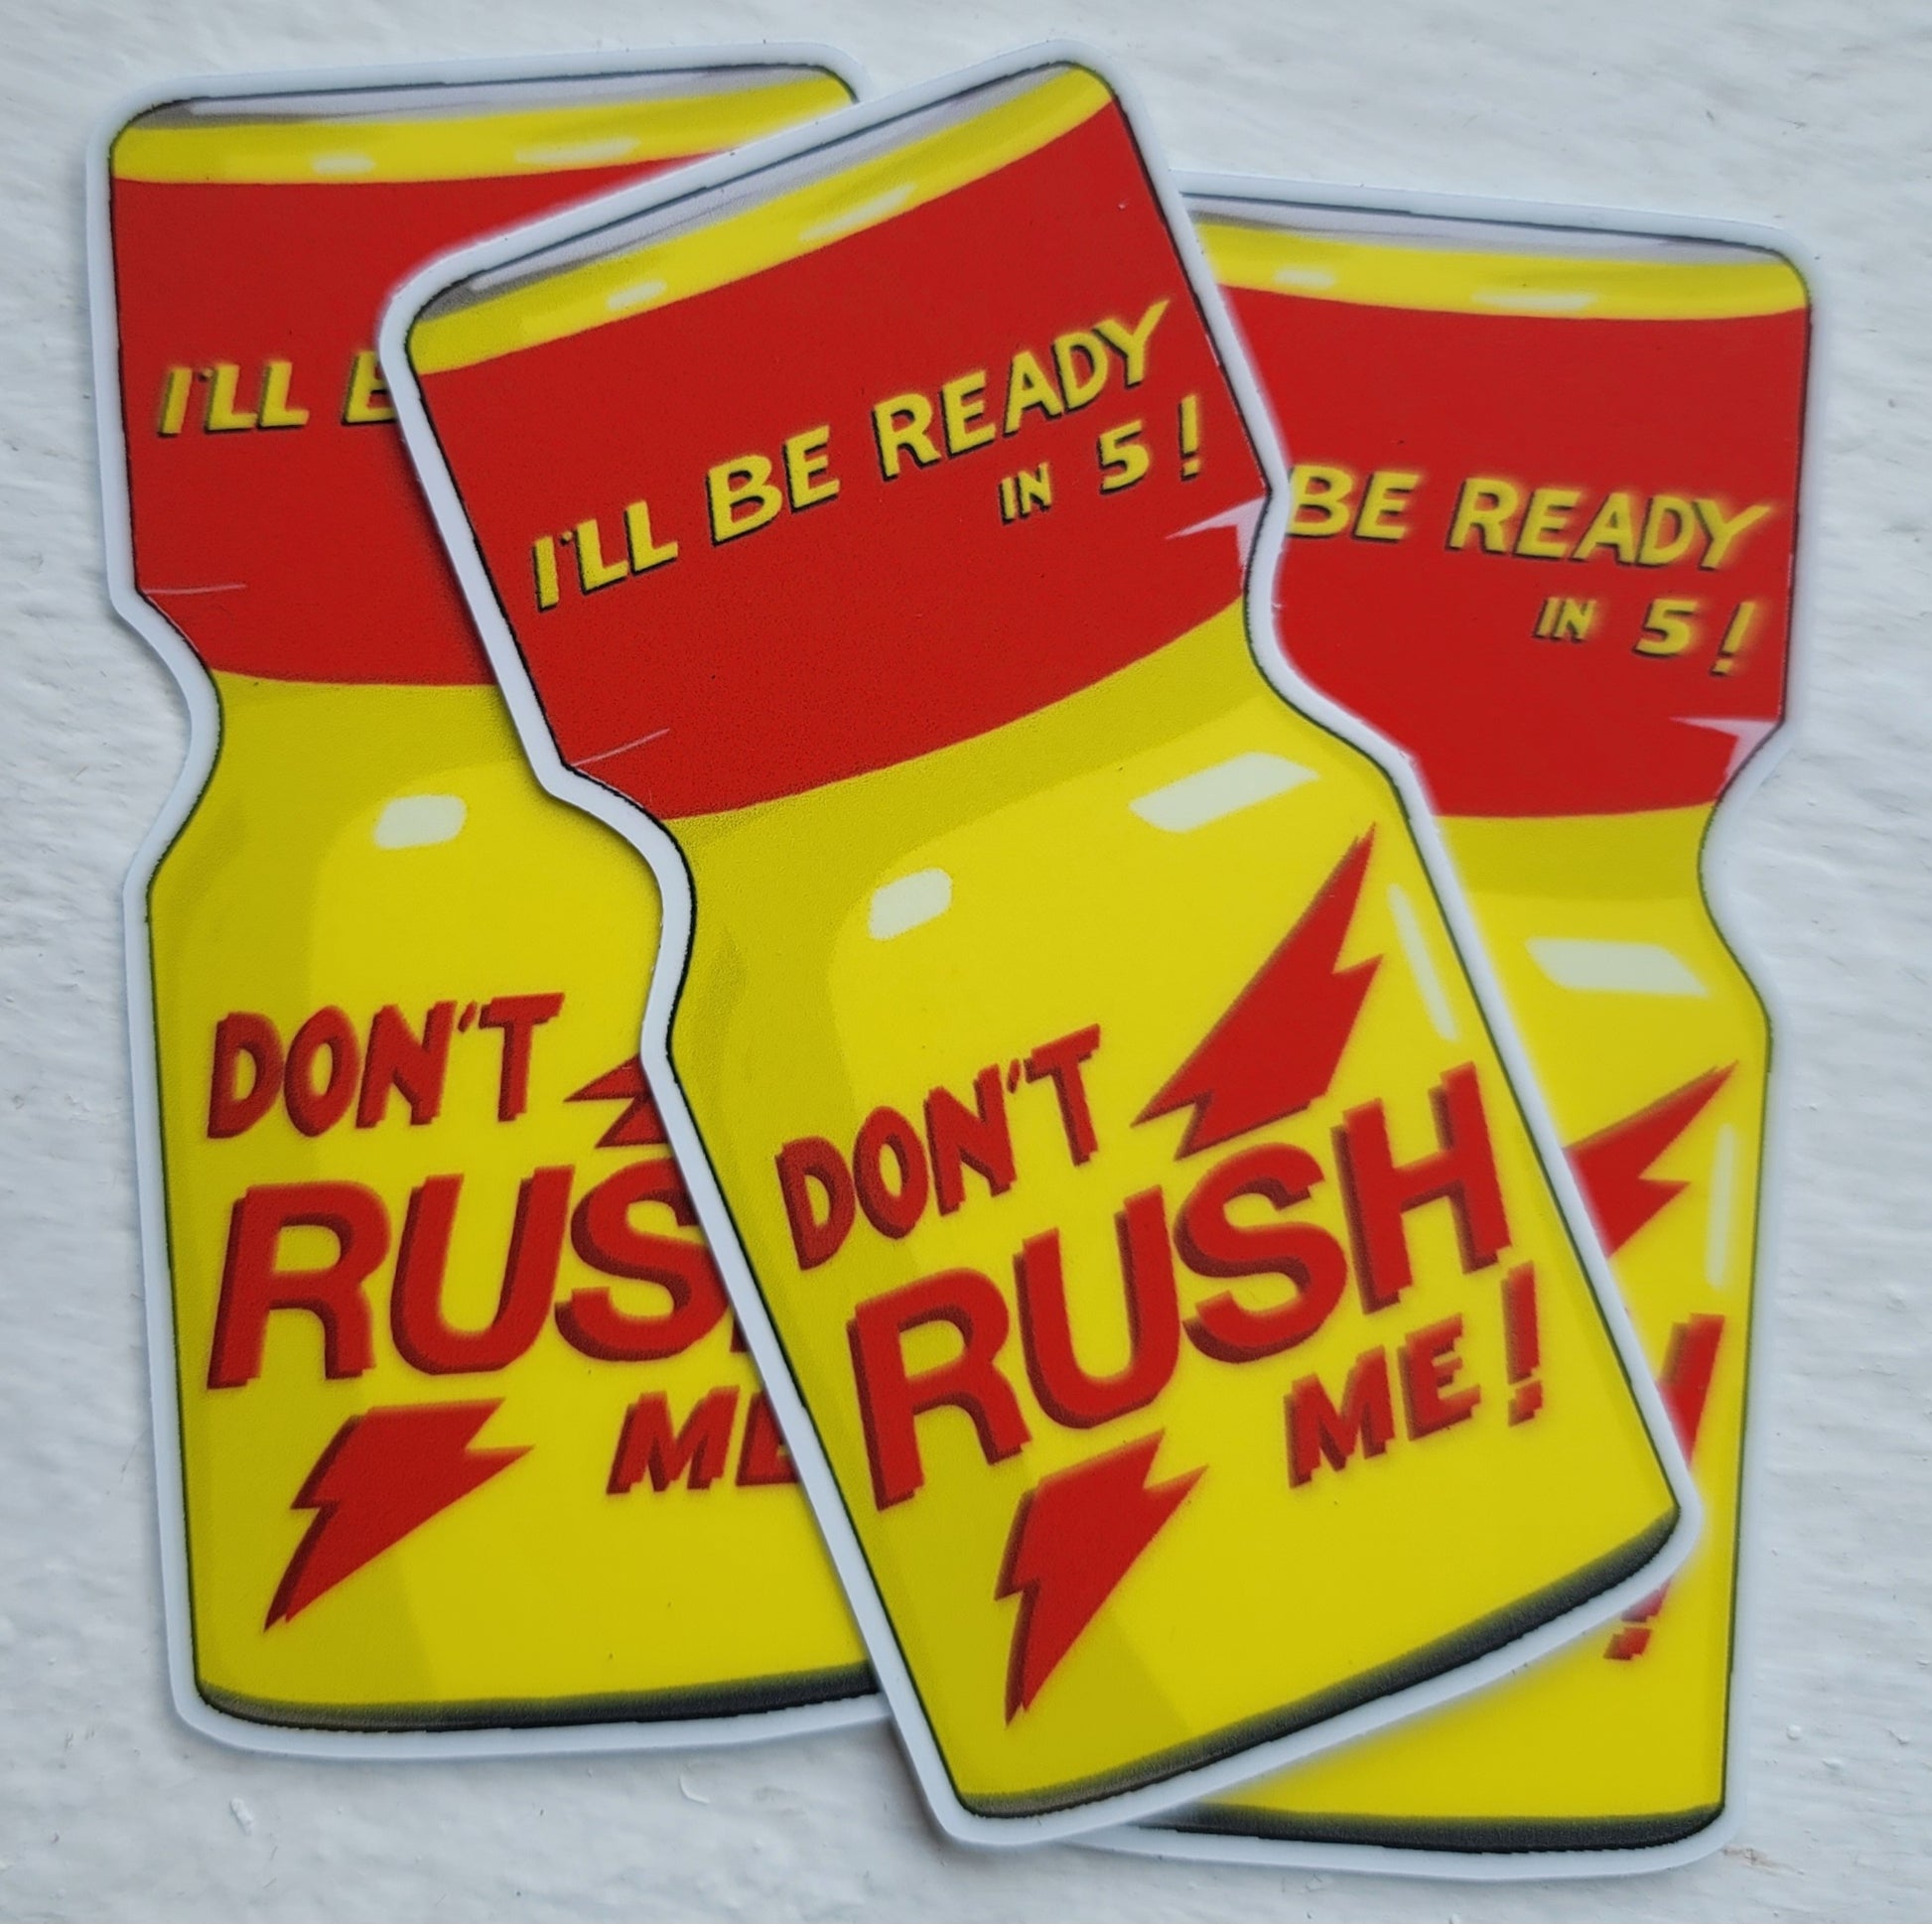 three bright yellow and red stickers that say "Dont Rush Me!" and are shaped like a bottle of Rush